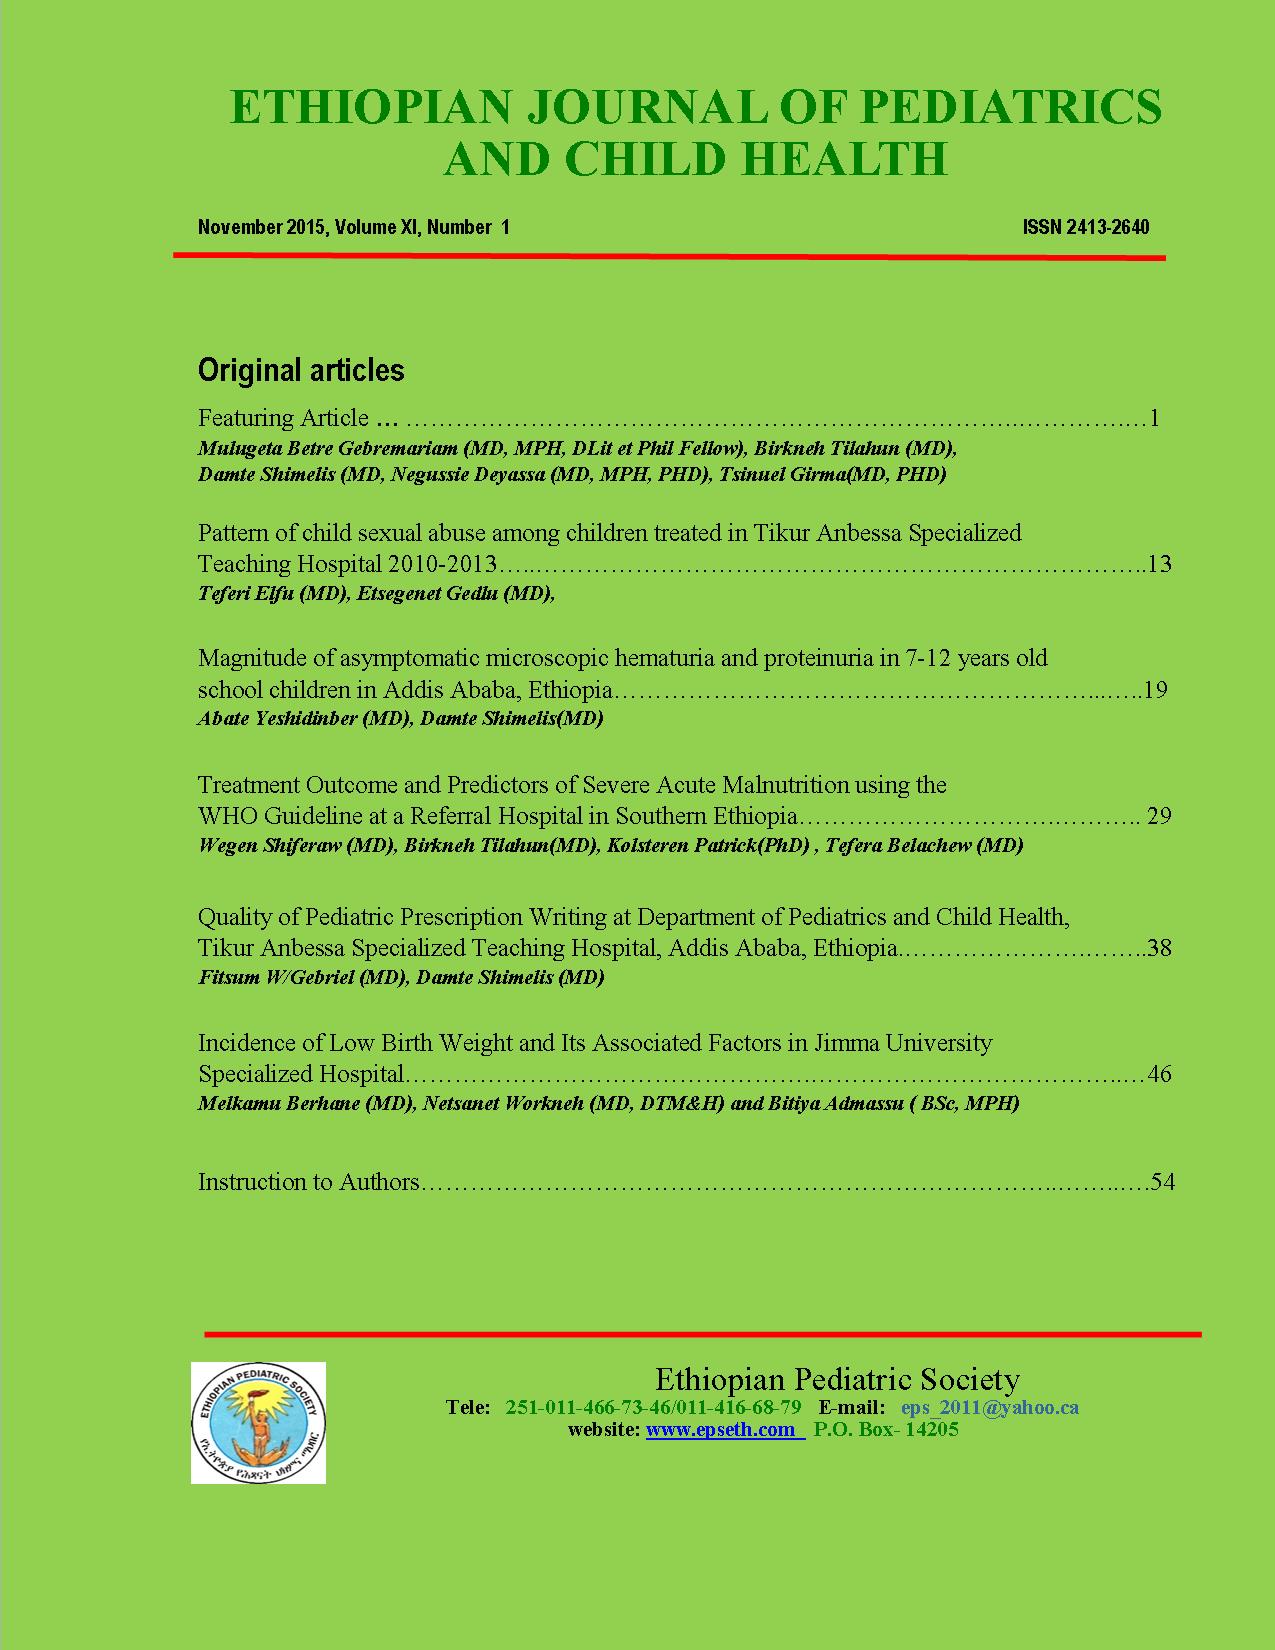 EJPCH August 2016 Issue